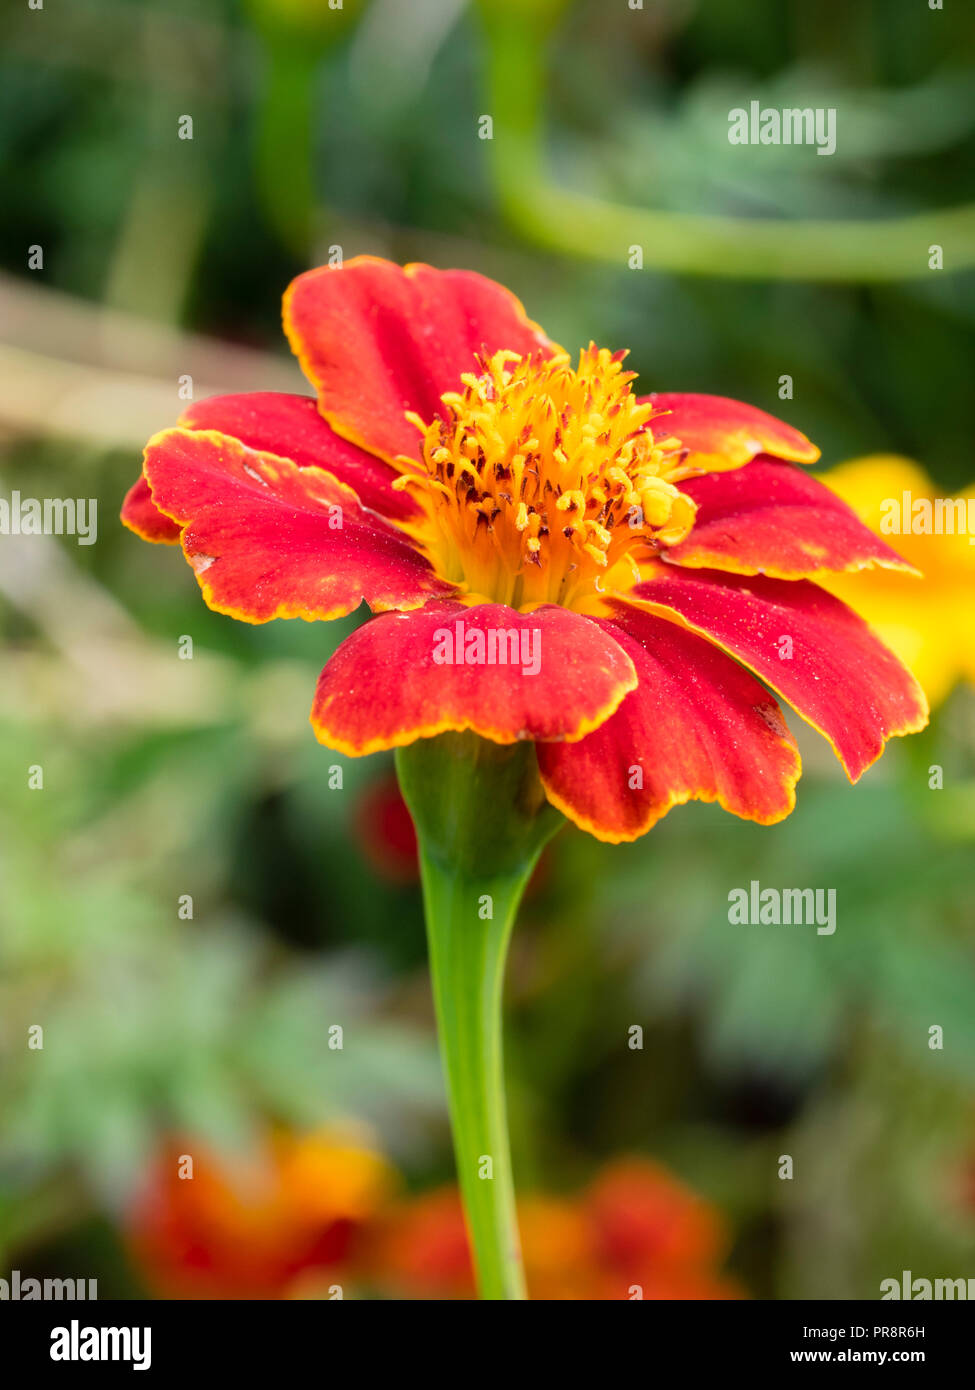 Gold rimmed red single flower of the tall annual growing african marigold, Tagetes 'Cinnabar' Stock Photo